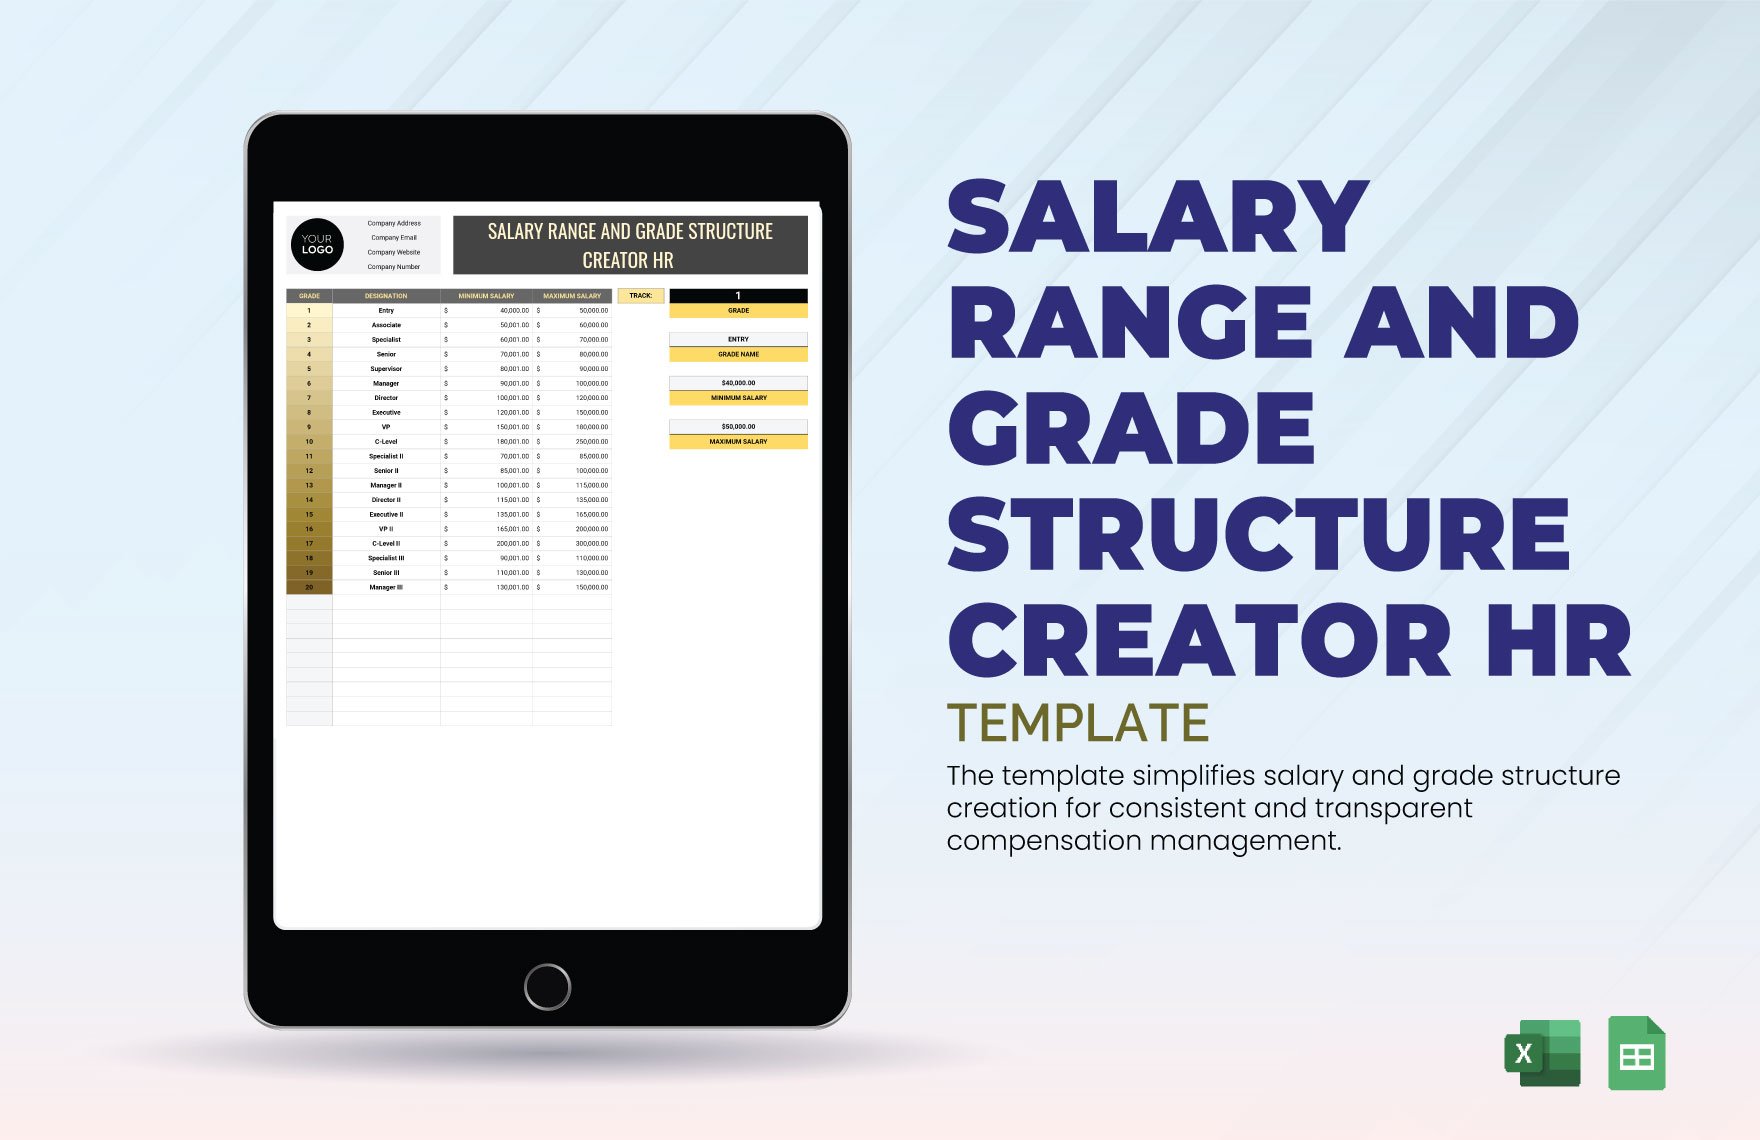 Salary Range and Grade Structure Creator HR Template